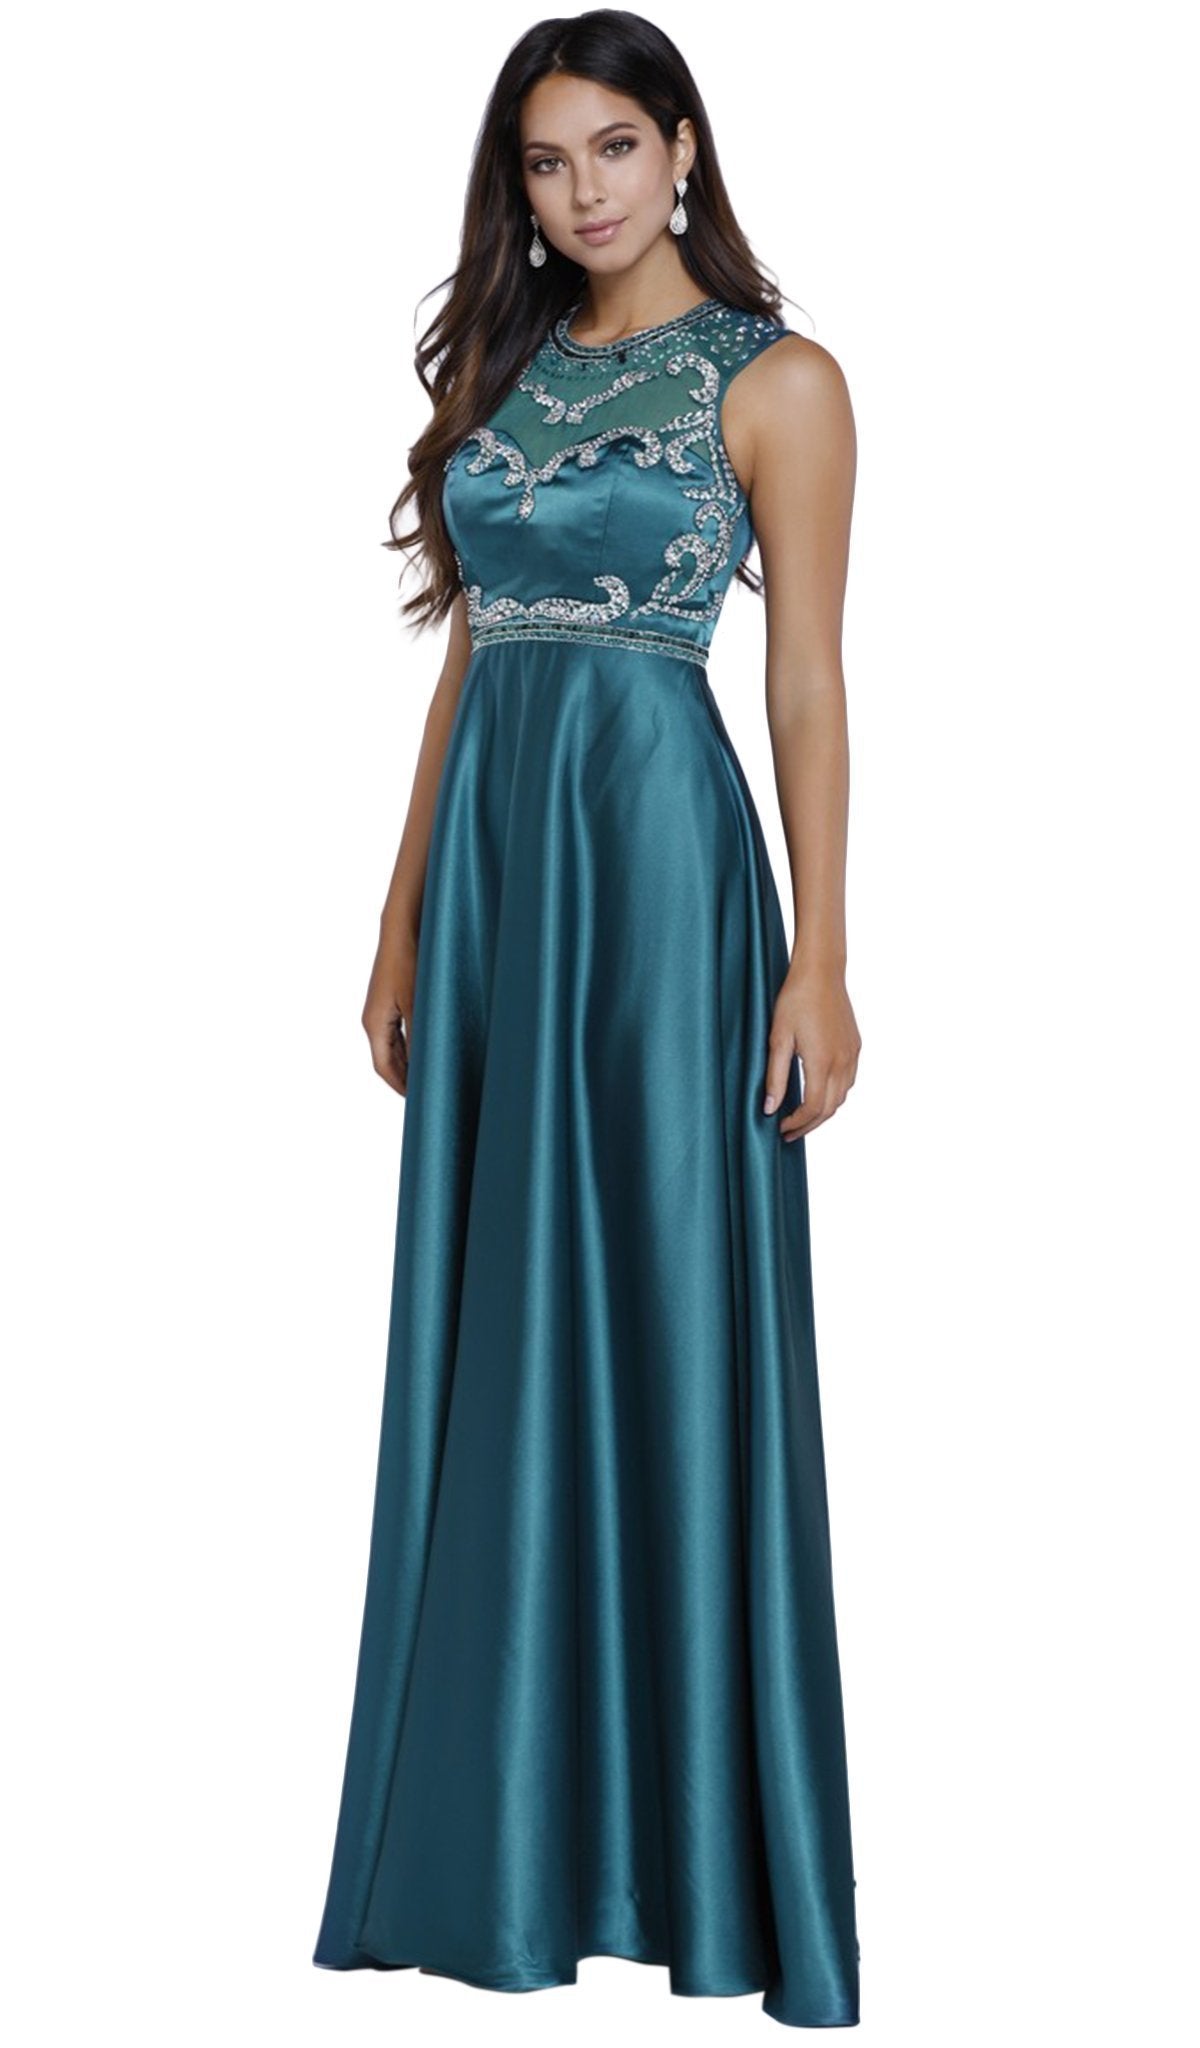 Nox Anabel - 8188 Bedazzled Illusion Jewel A-line Dress Special Occasion Dress XS / Teal